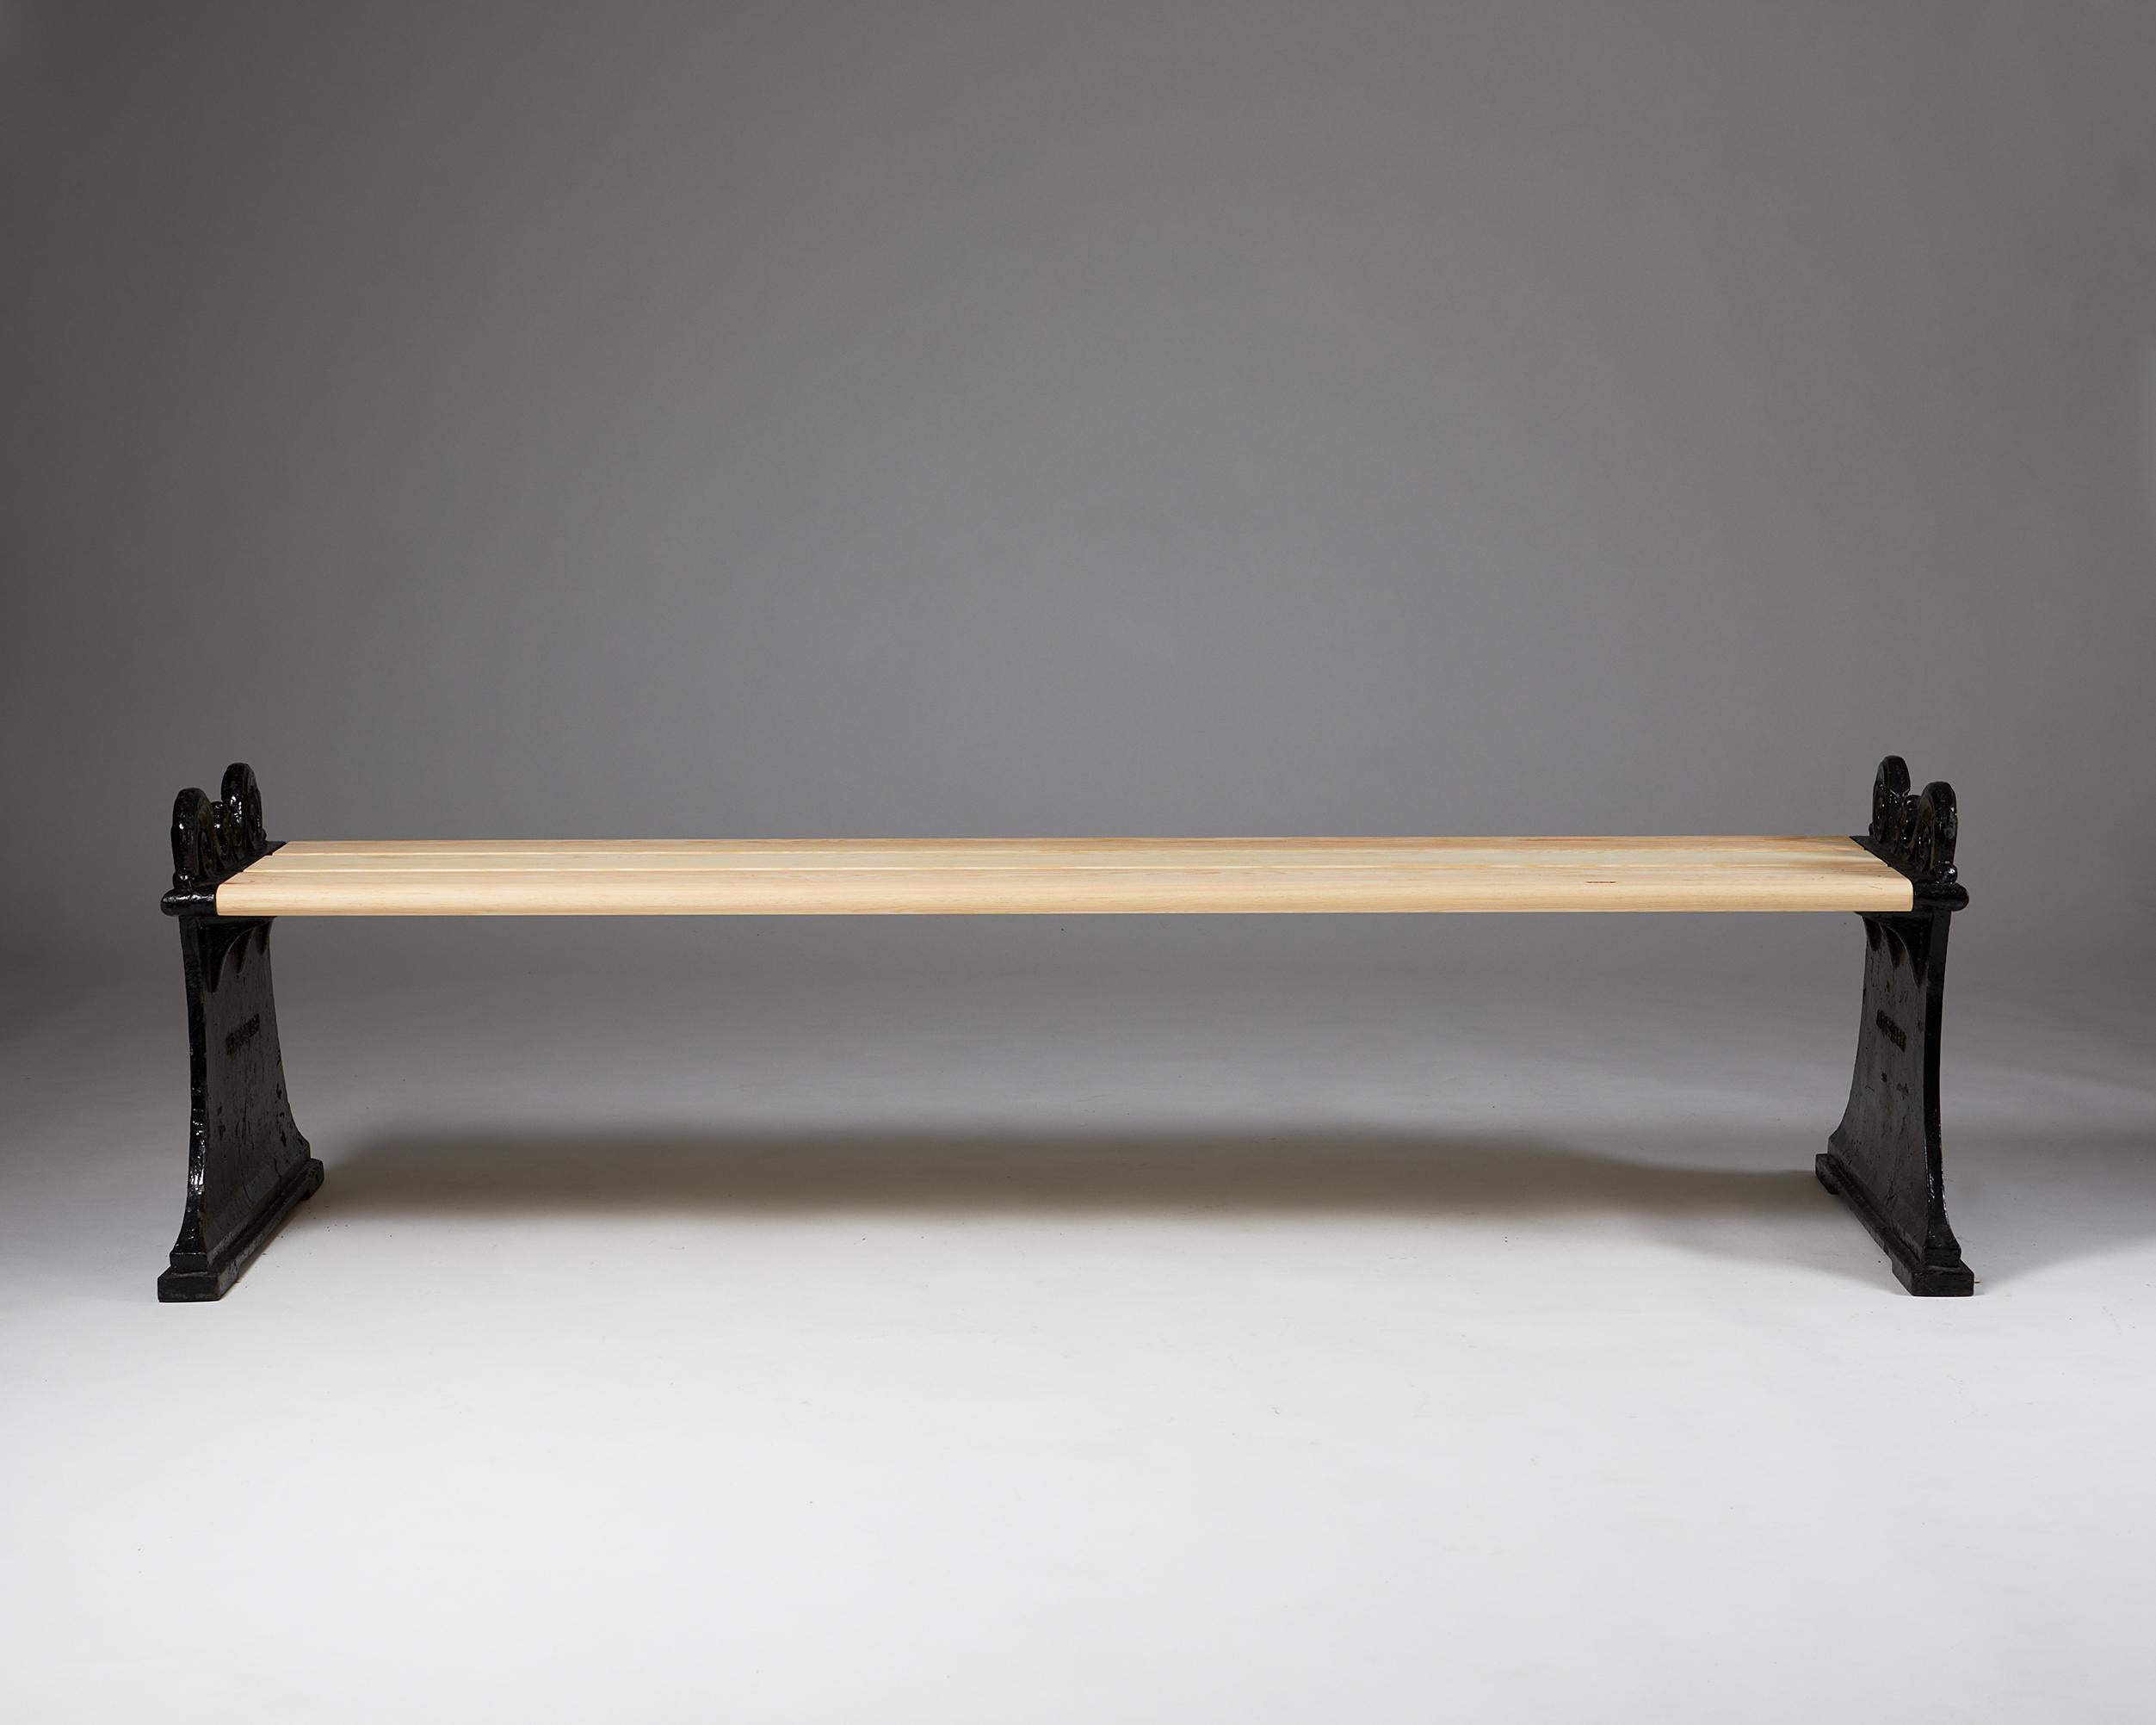 Swedish Bench with a Pair of Gables ‘Parkbänk No 1’ by Folke Bensow for Näfveqvarn